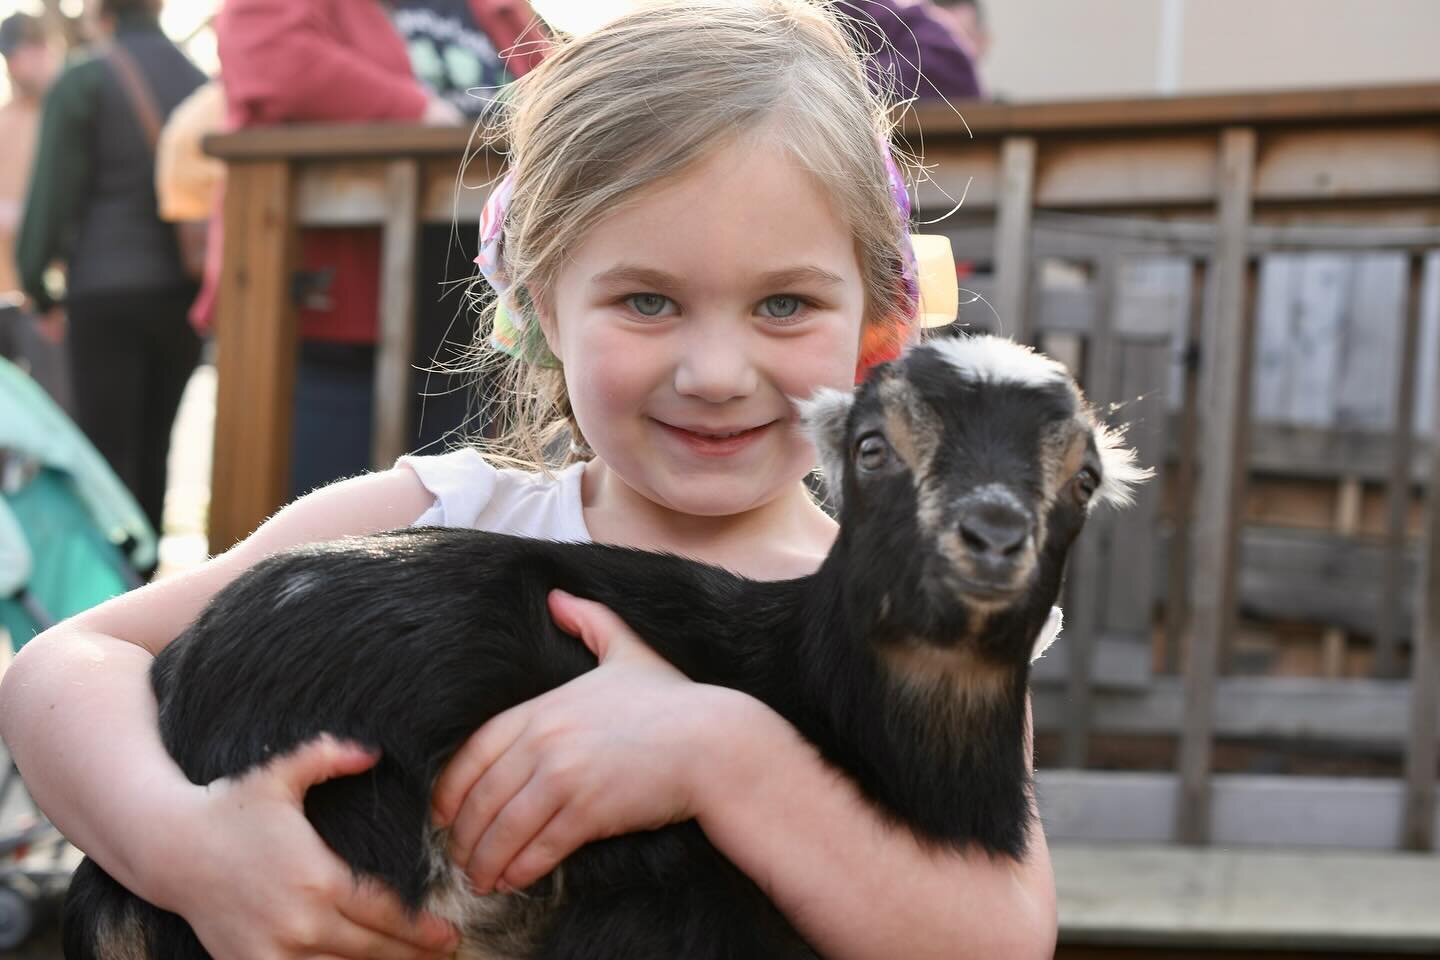 Baby Goats return this Thursday, March 14th! 5pm-8pm

☀️Mother nature approves baby goats and has blessed us with sunshine the rest of this week!

🐐Ridgewalker has teamed up with a local goat breeder, @carpentercreekranch to provide all the cute bab